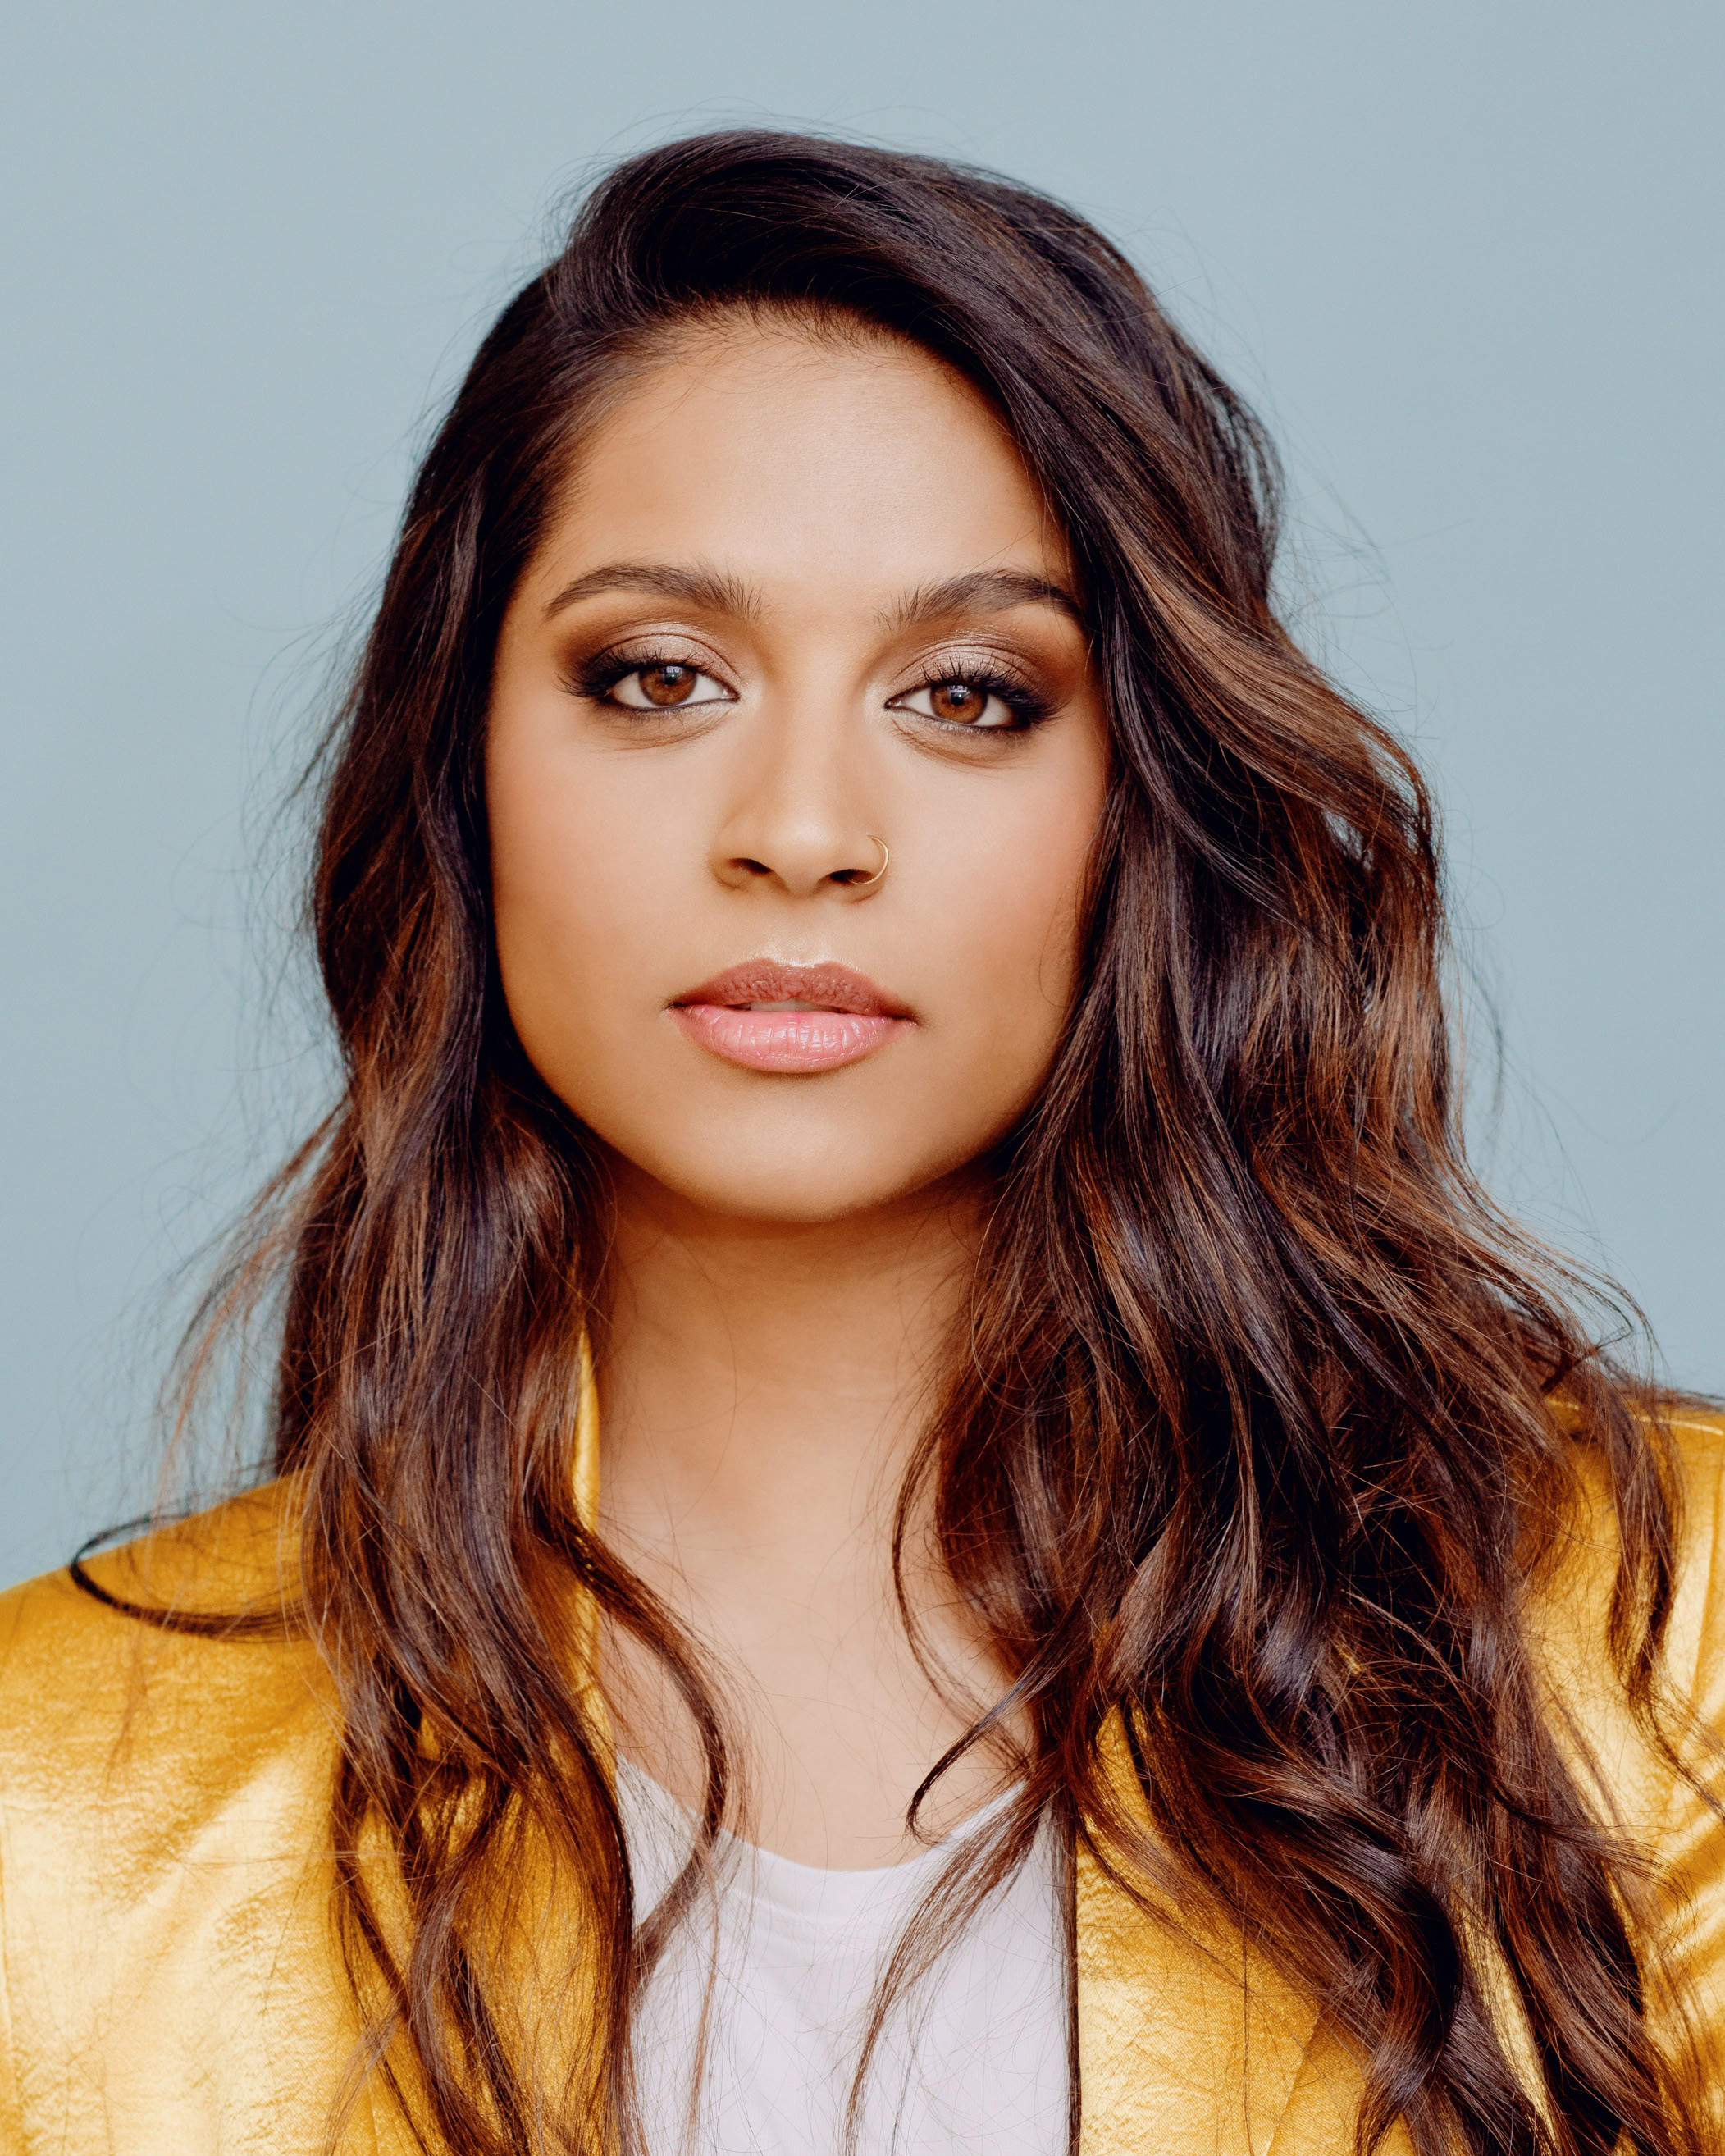 Lilly Singh teams up with Jane Walker by Johnnie Walker for First Women campaign celebrating and inspiring women breaking boundaries.